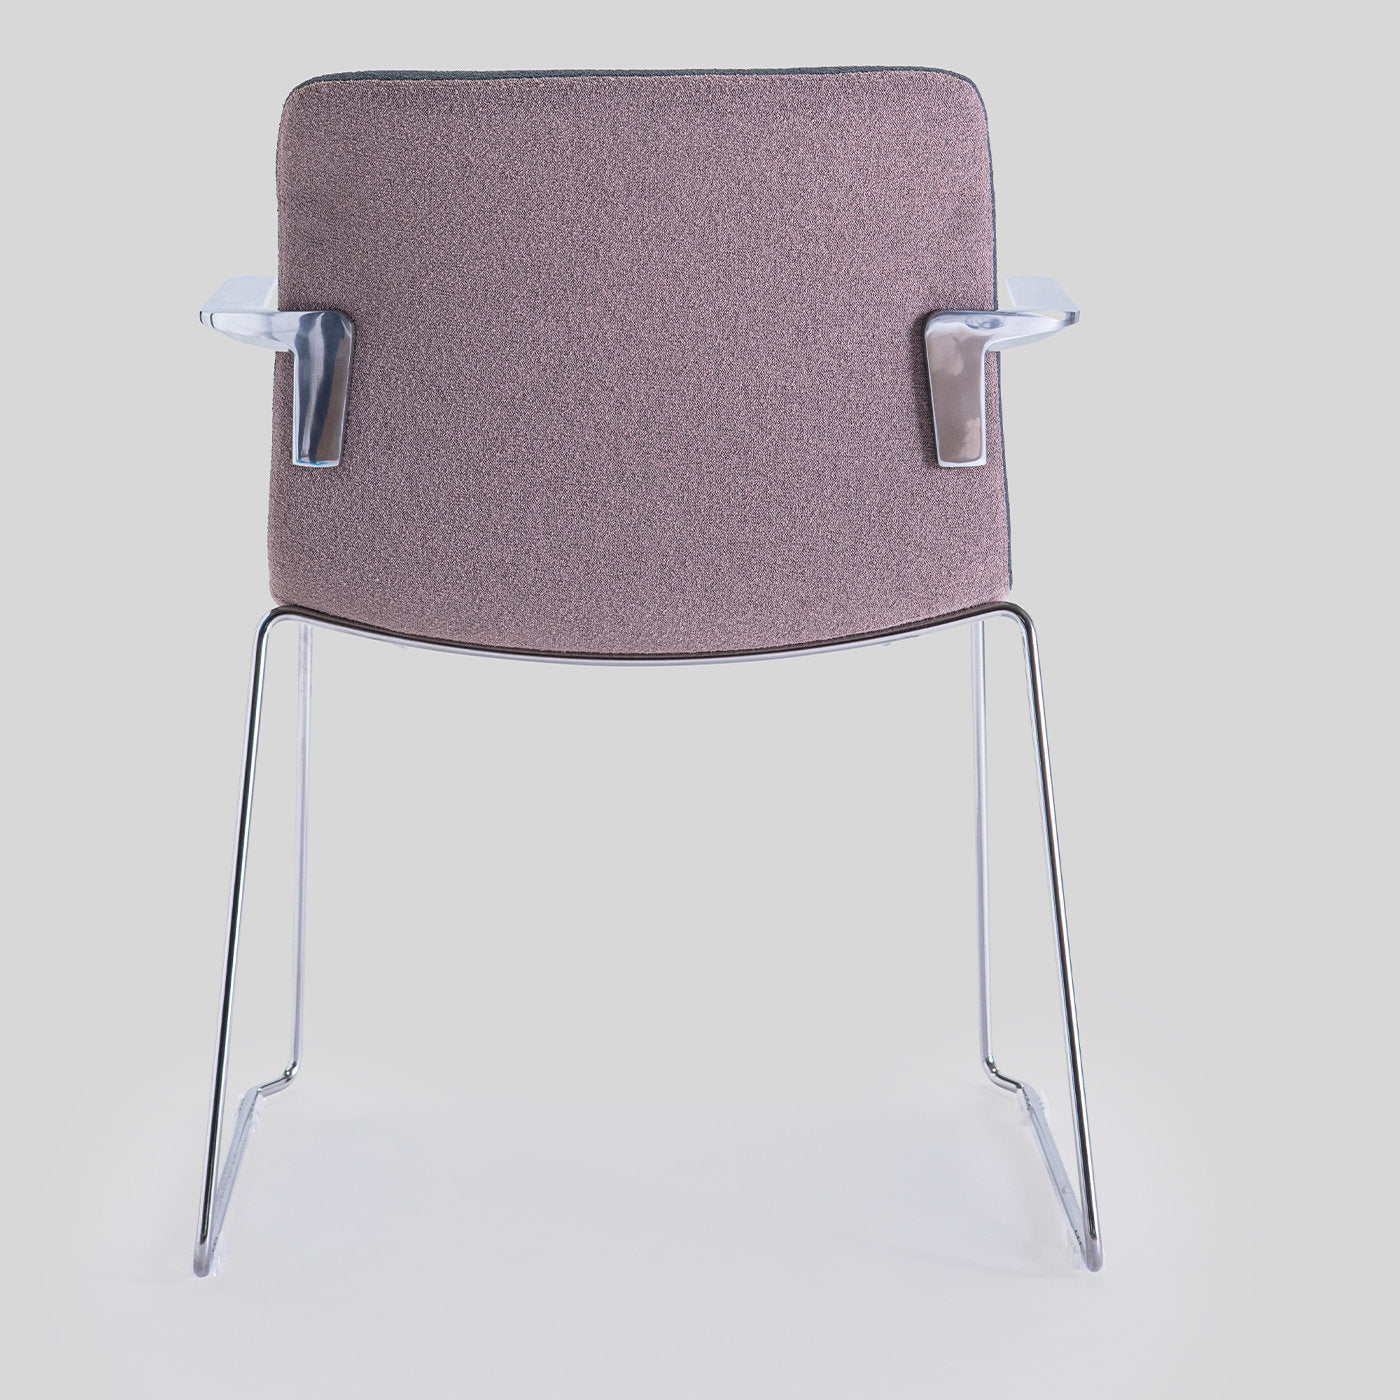 Techna Gray Chair with Armrests - Alternative view 4